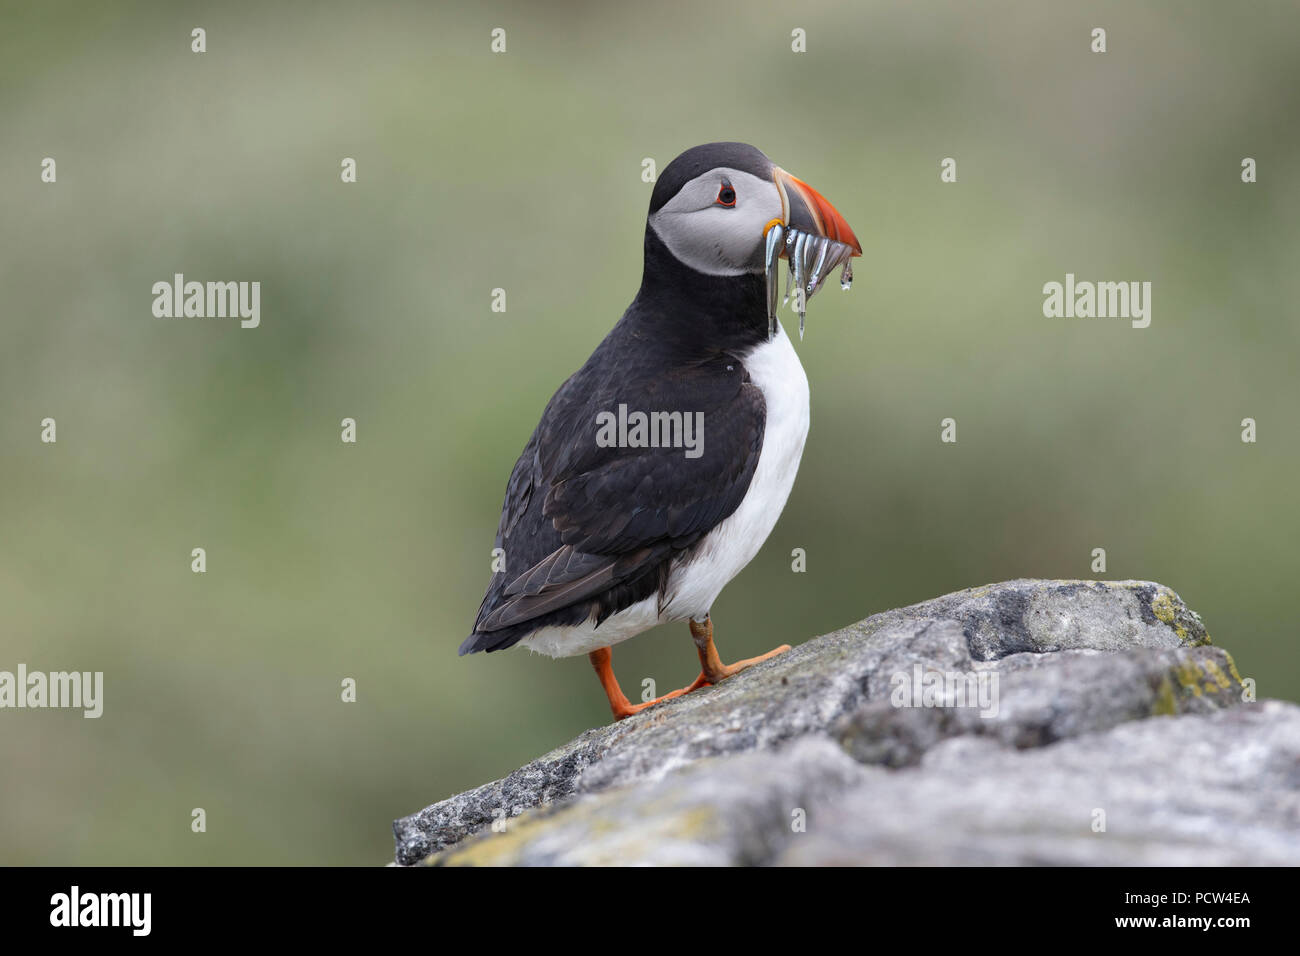 Puffin on a rock on cliff edge Stock Photo